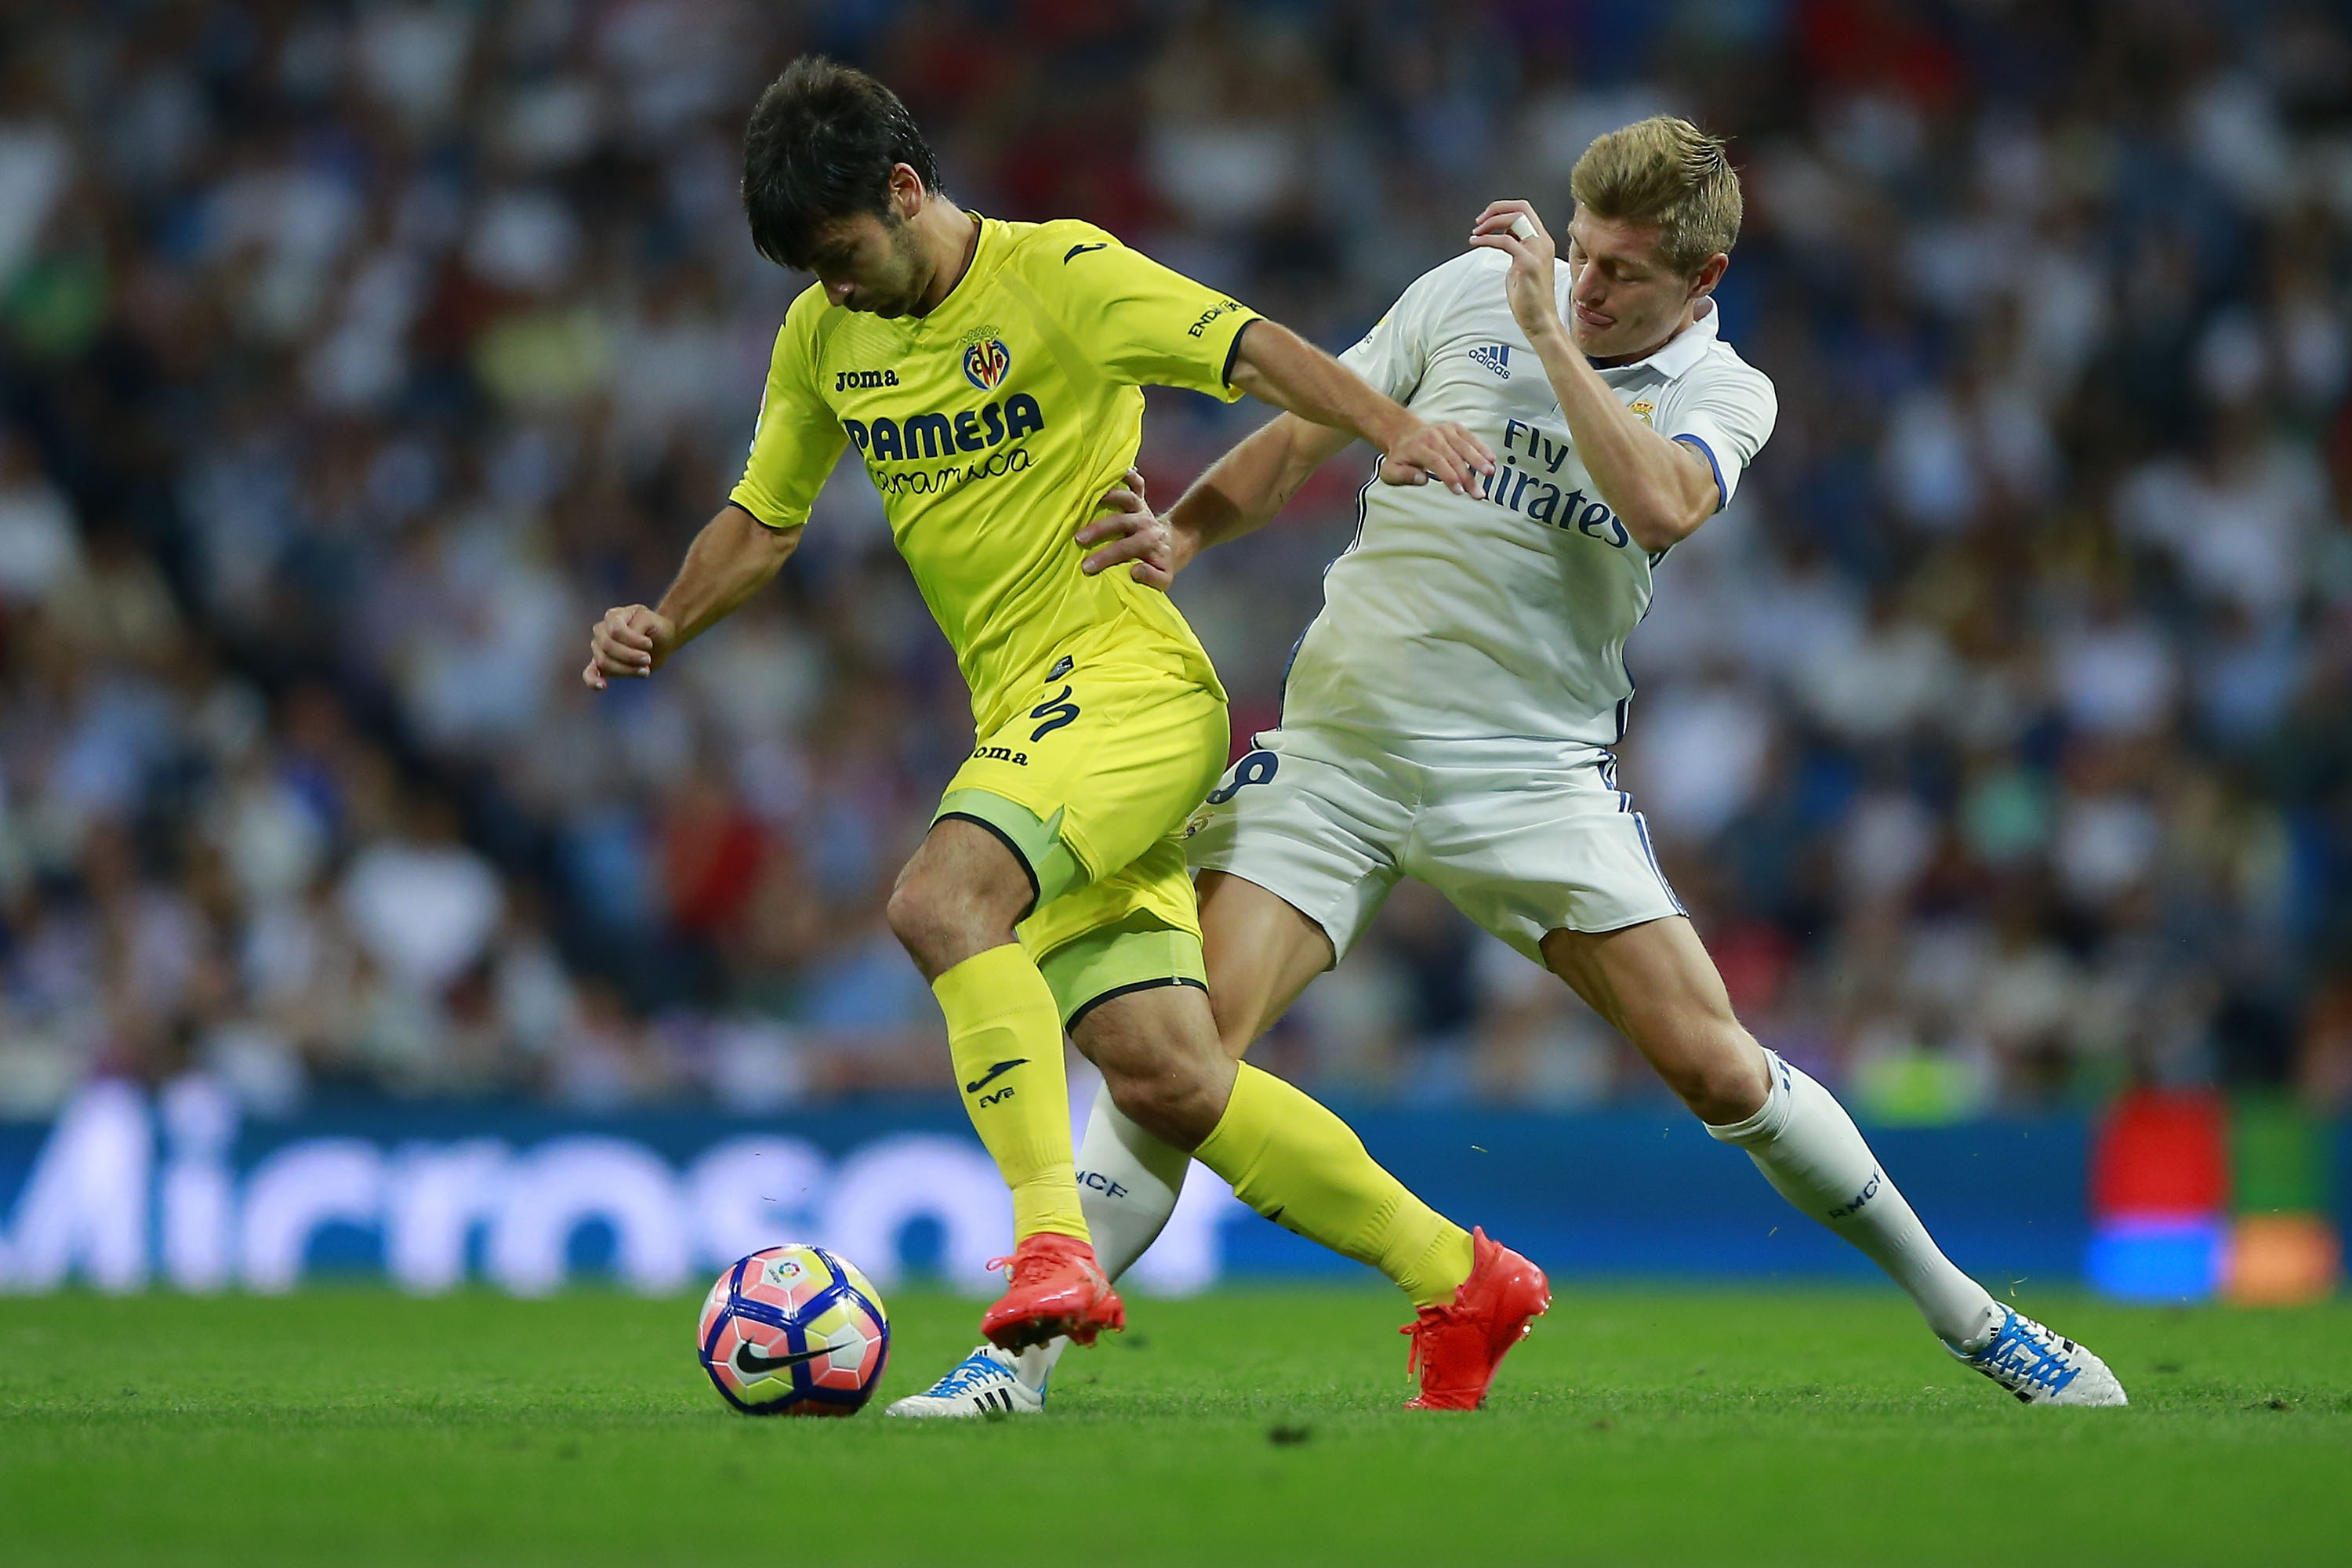 MADRID, SPAIN - SEPTEMBER 21: Toni Kroosn (R) of Real Madrid CF competes for the ball with Manuel Trigueros (L) of Villarreal CF during the La Liga match between Real Madrid CF and Villarreal CF at Santiago Bernabeu stadium on September 21, 2016 in Madrid, Spain. (Photo by Gonzalo Arroyo Moreno/Getty Images)